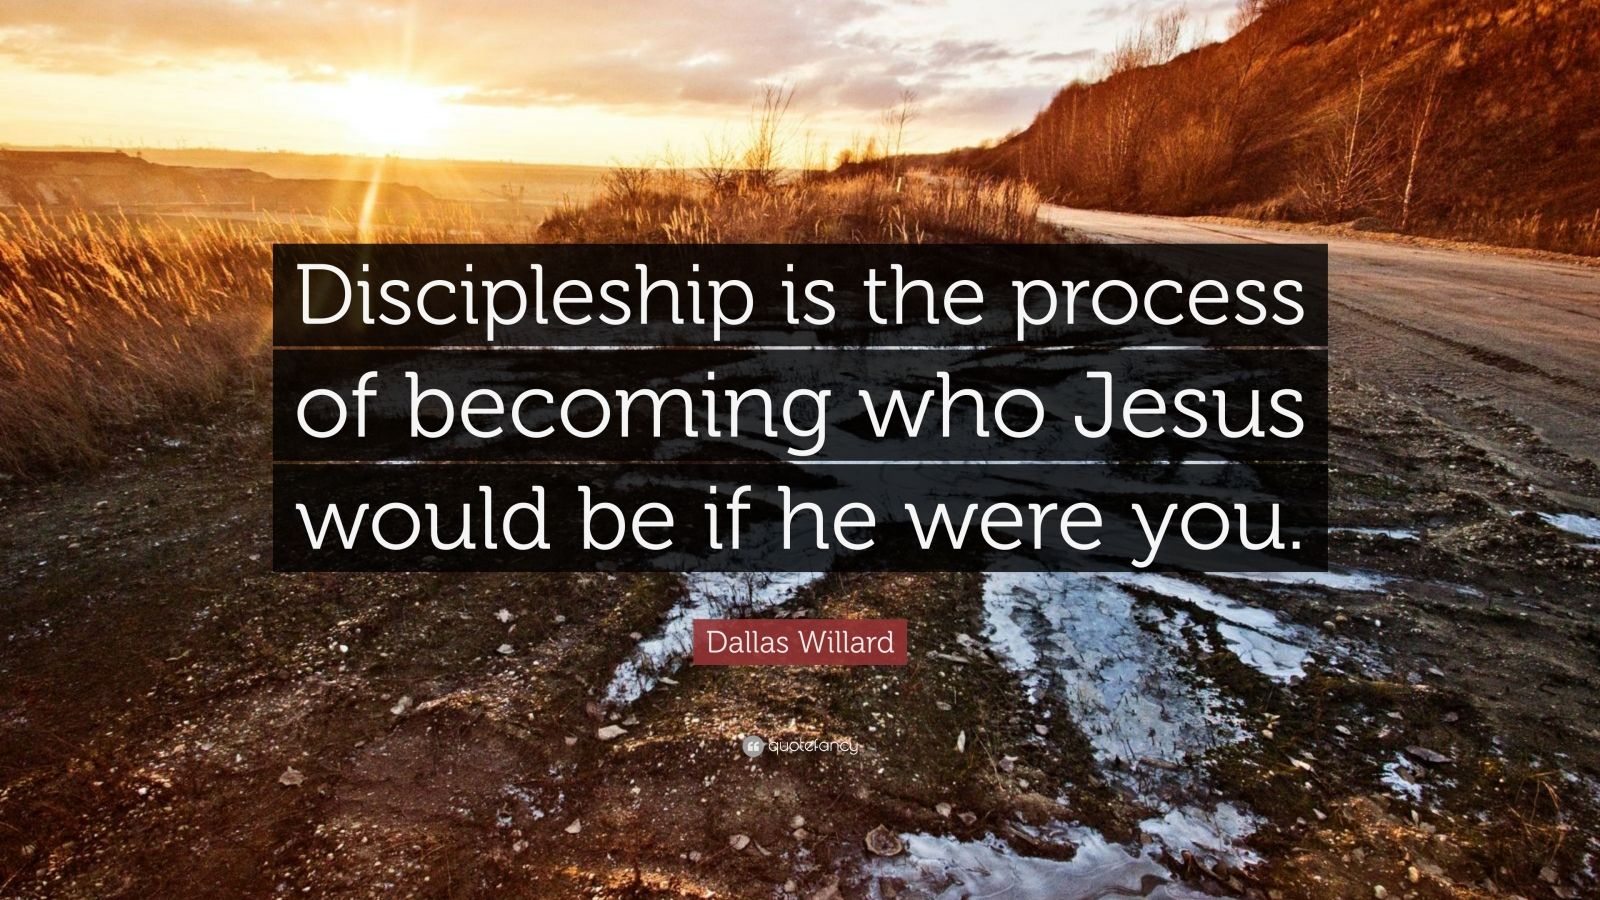 Dallas Willard Quote “Discipleship is the process of who